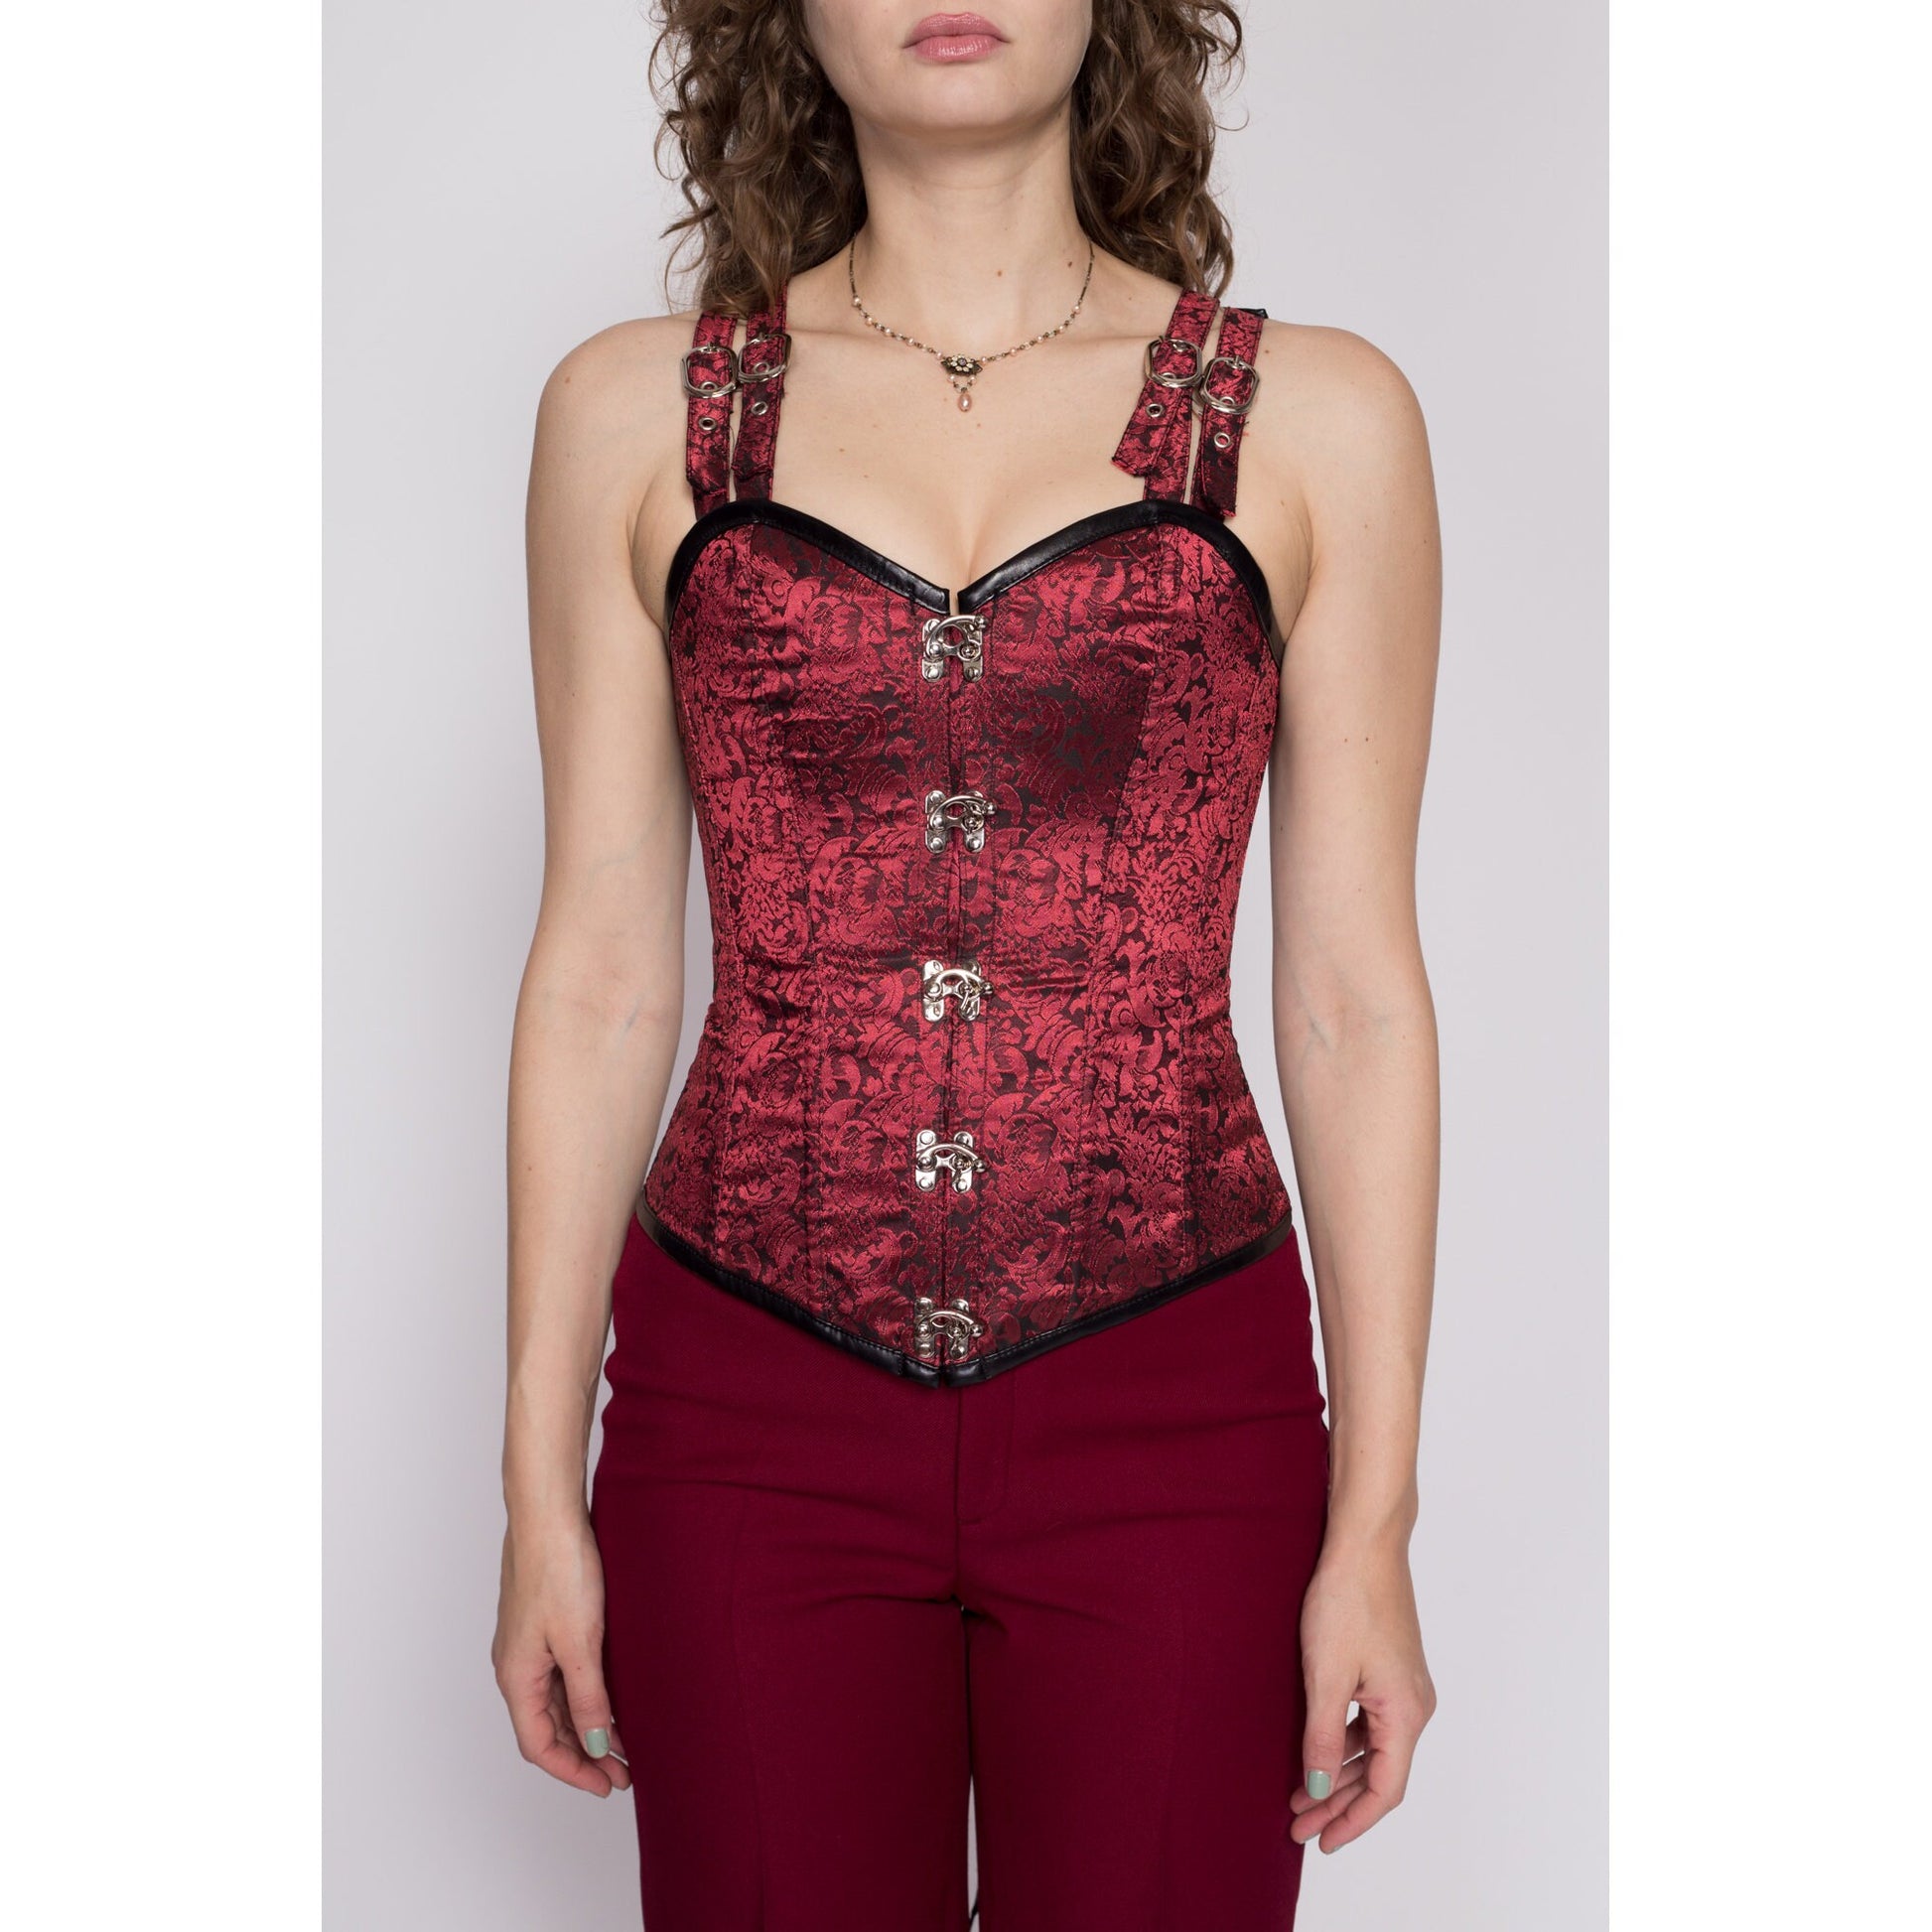 Red Jacquard Satin Ruffle Trim Lace Up Back Western Corset Top, pinup, pin  up, Strapless, Top, Biker, Bustier, Gypsy, red, satin, jacquard, jaquard,  lace up, boho, cowgirl, western, sexy top, corset top